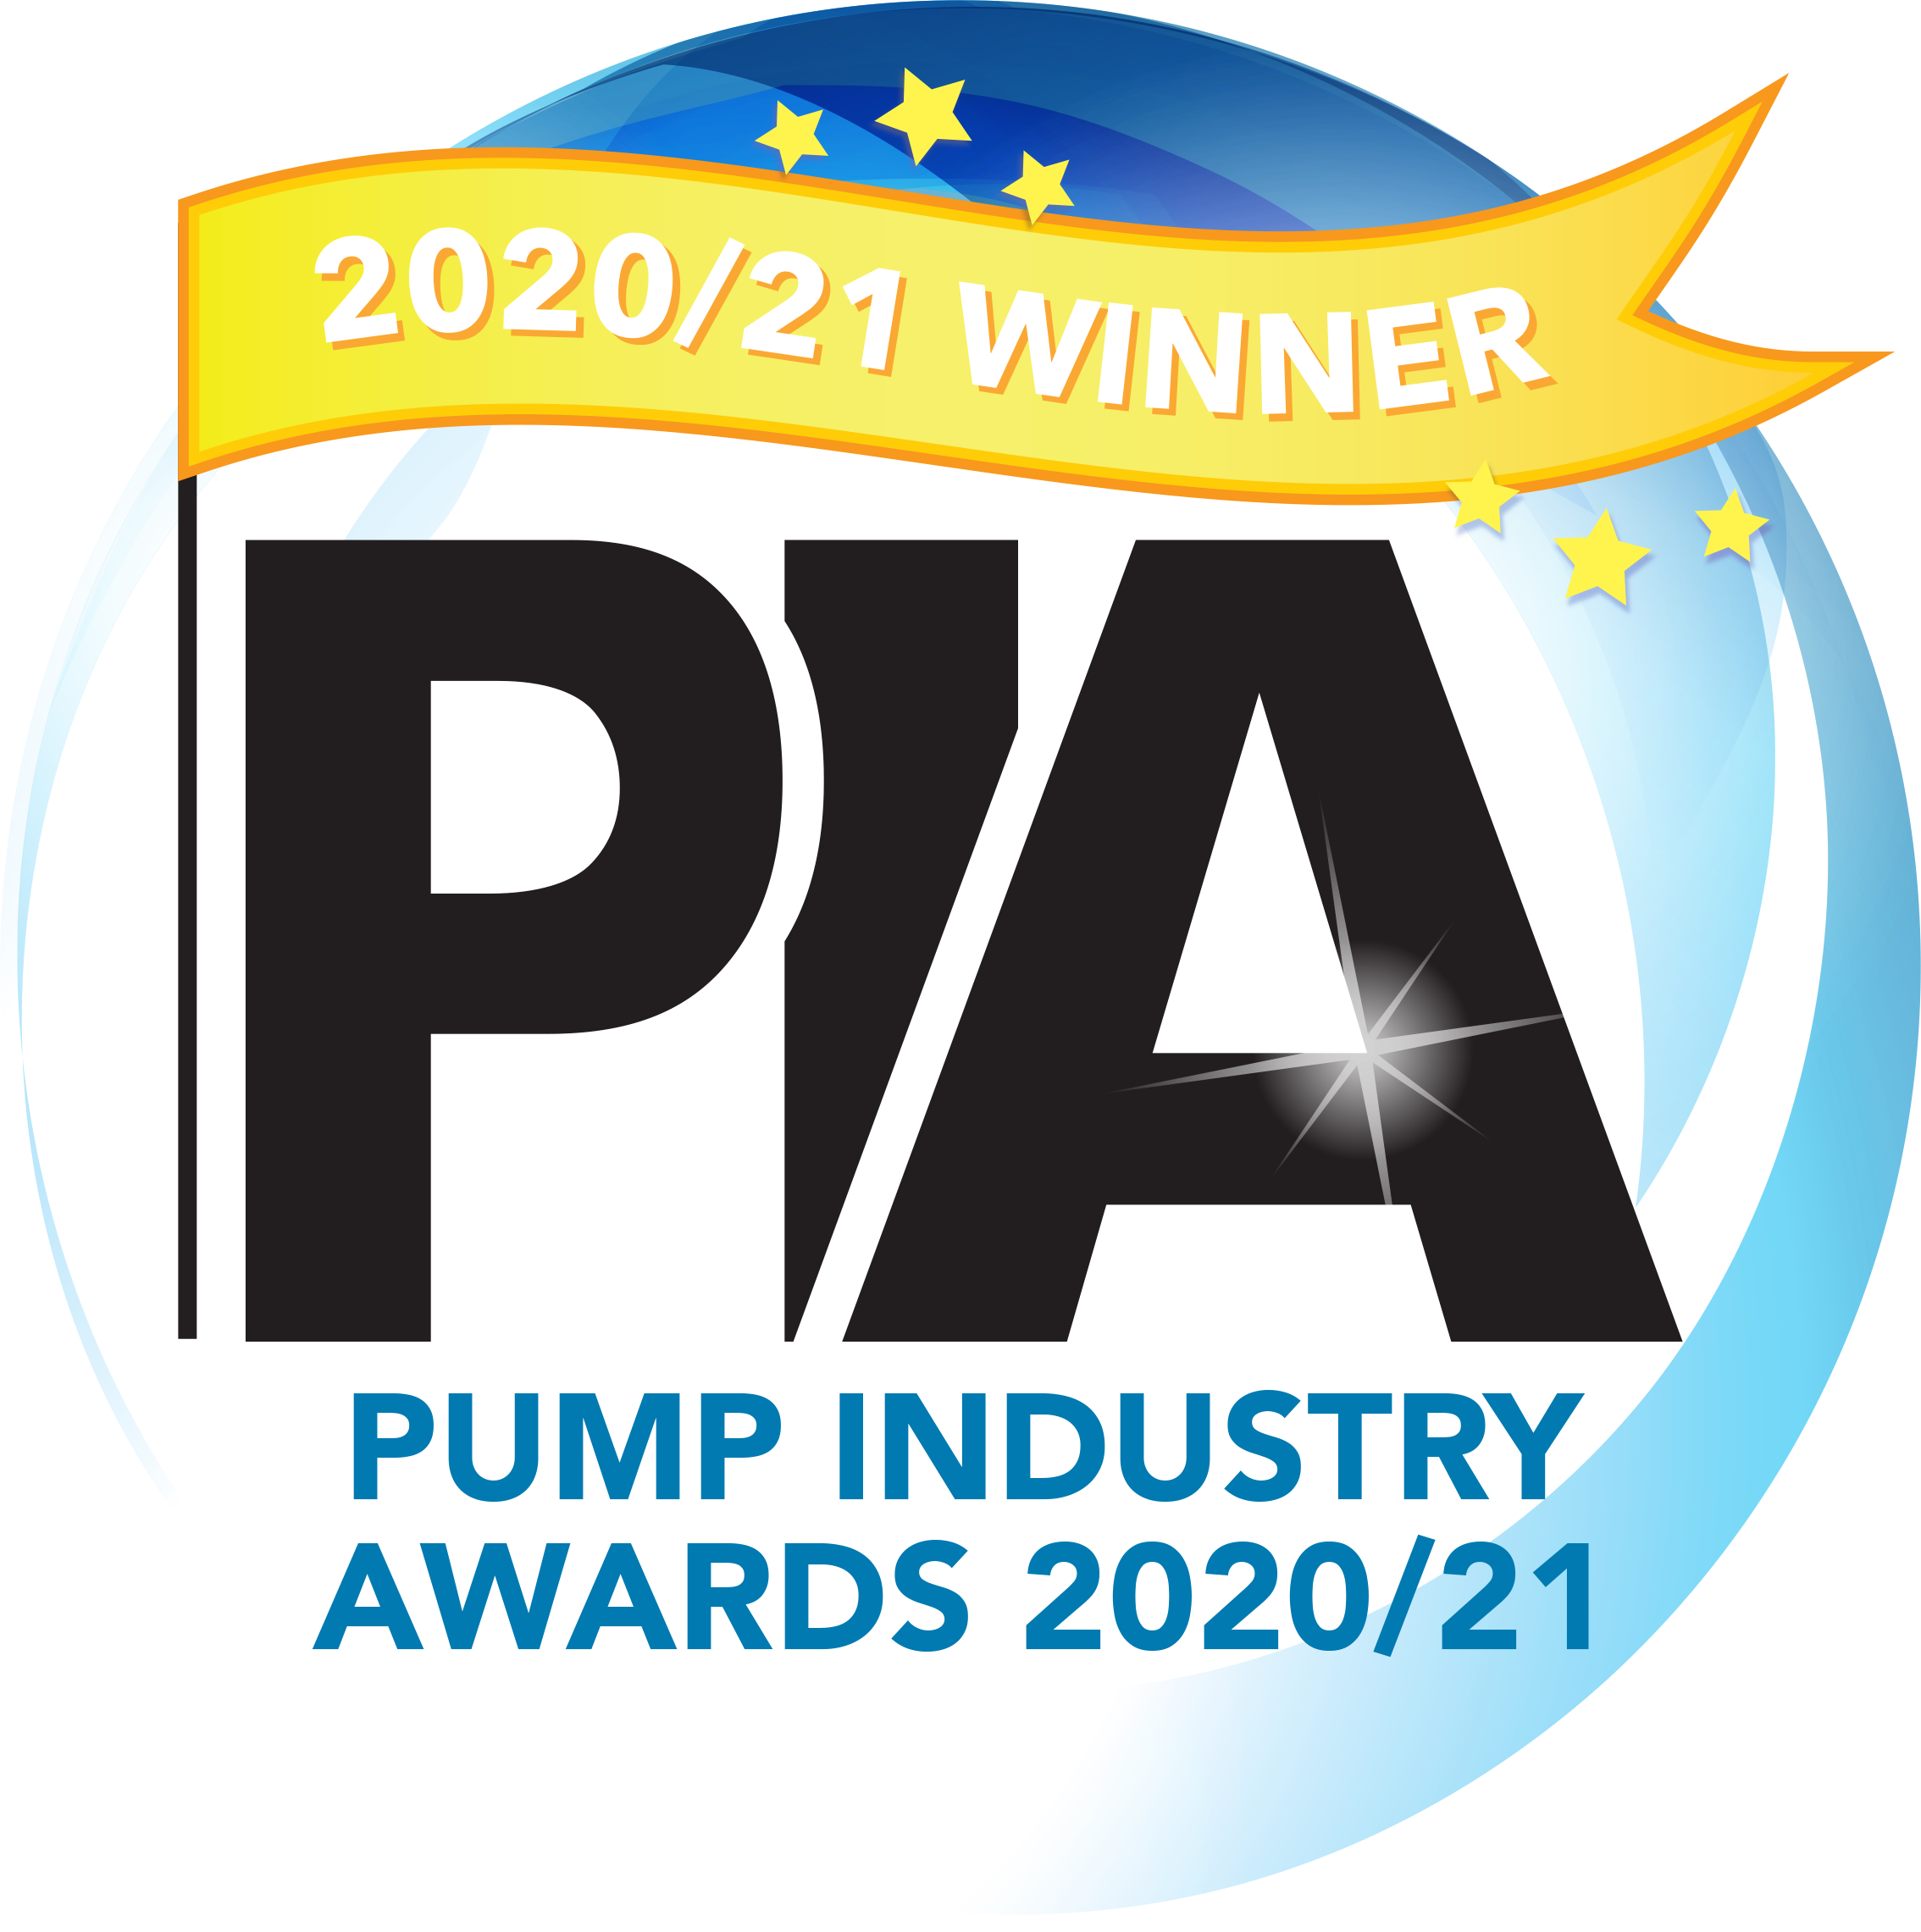 Pump Industry Award winners received their awards at a ceremony and gala dinner on 23 September.